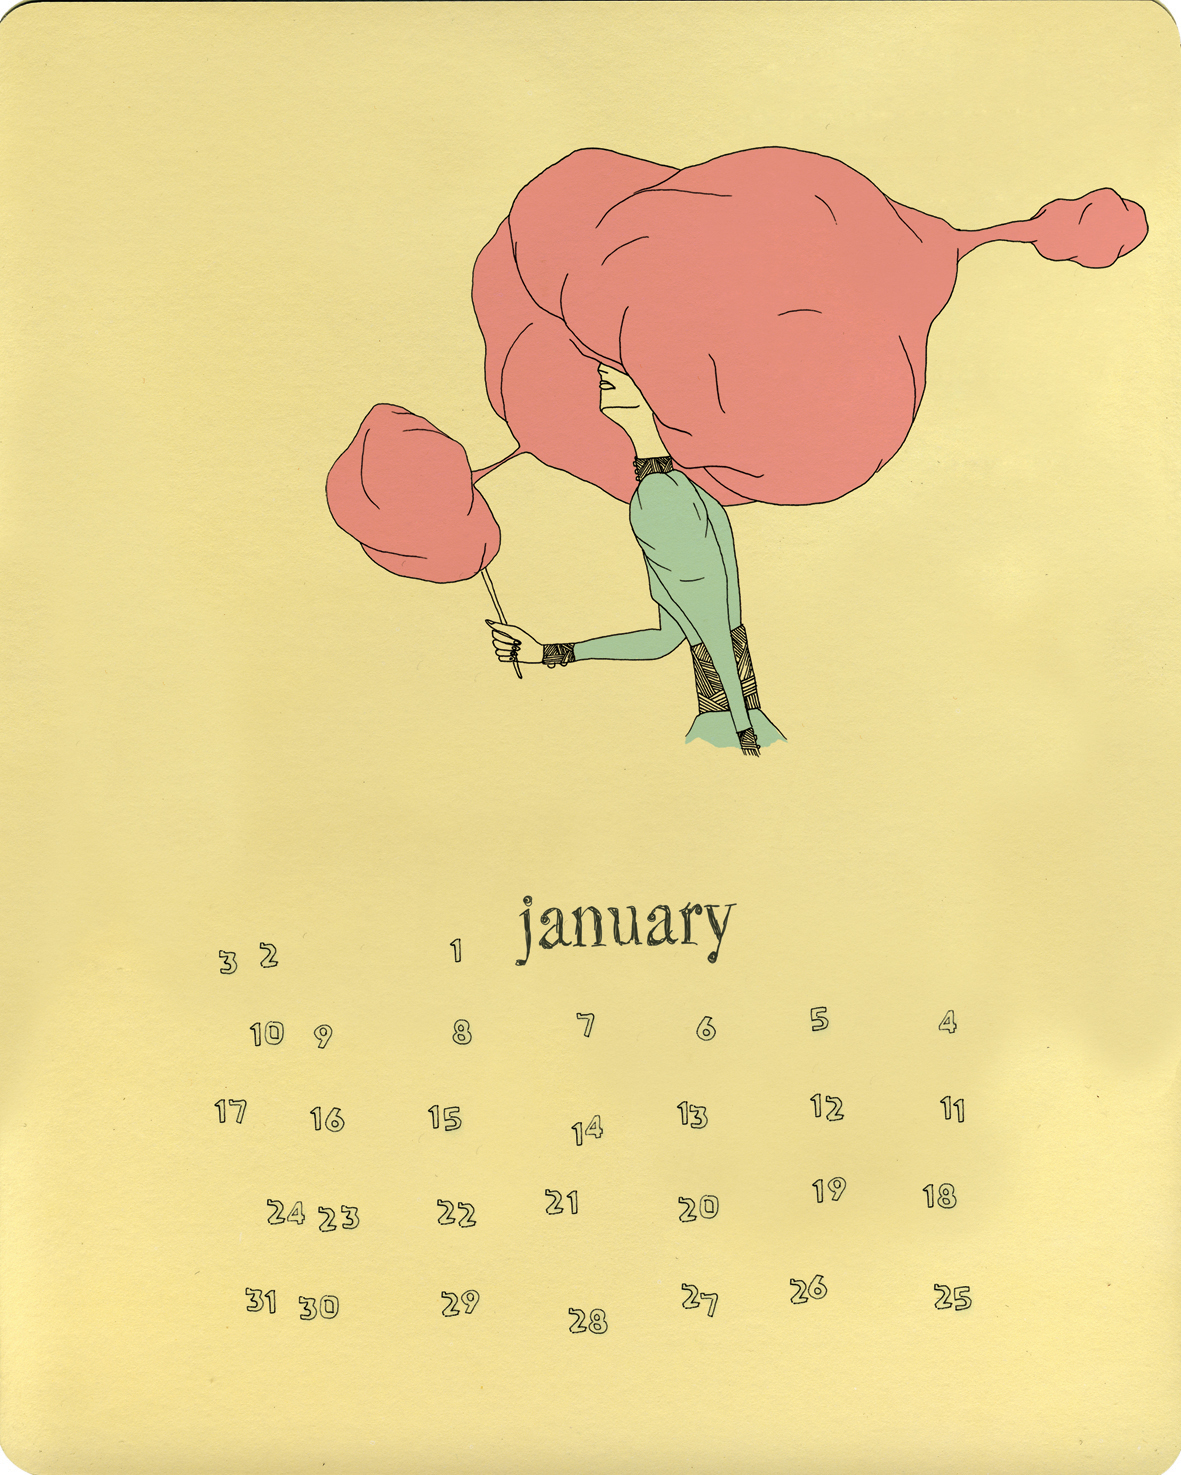 Calender cooton cotton candy day dreaming sweet fantasy cool old paper India clouds pink blue yellow